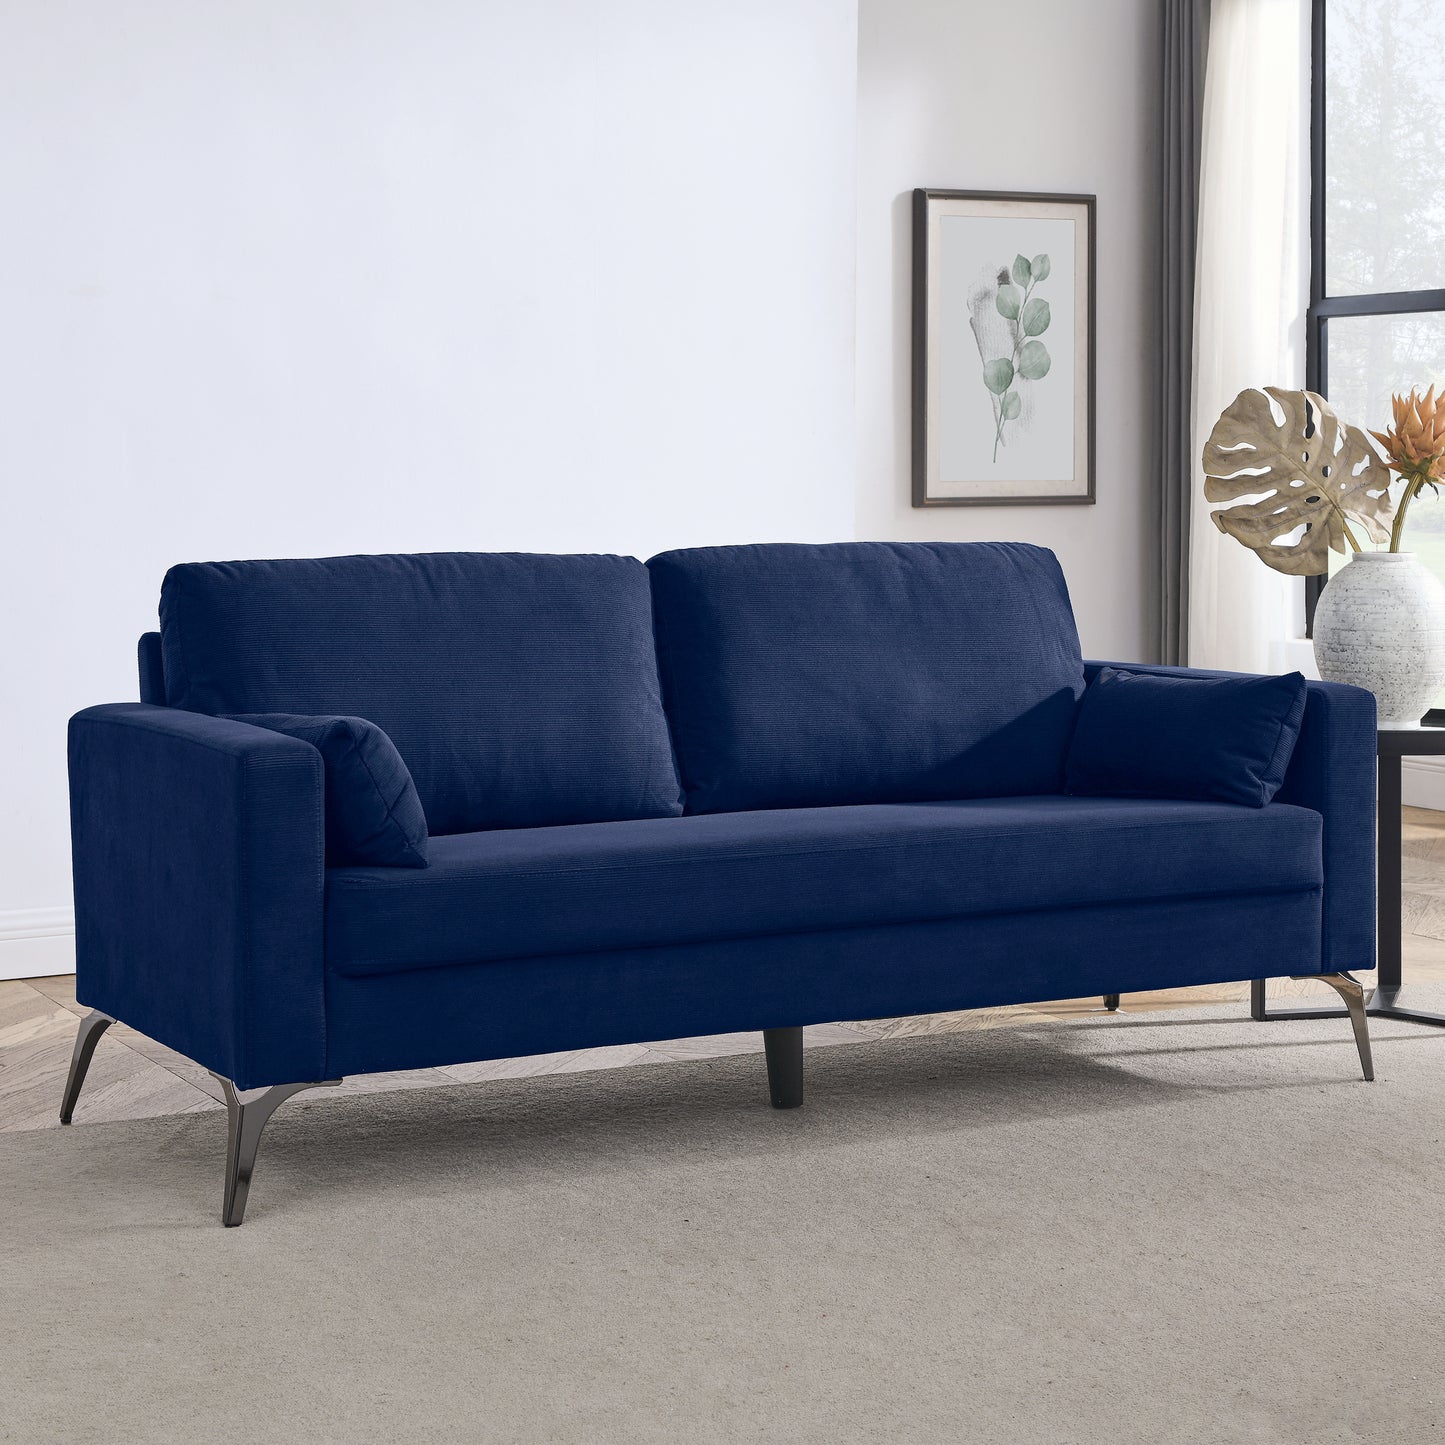 Corduroy 3-Seater Sofa with Square Arms, Two Accent Pillows - Navy